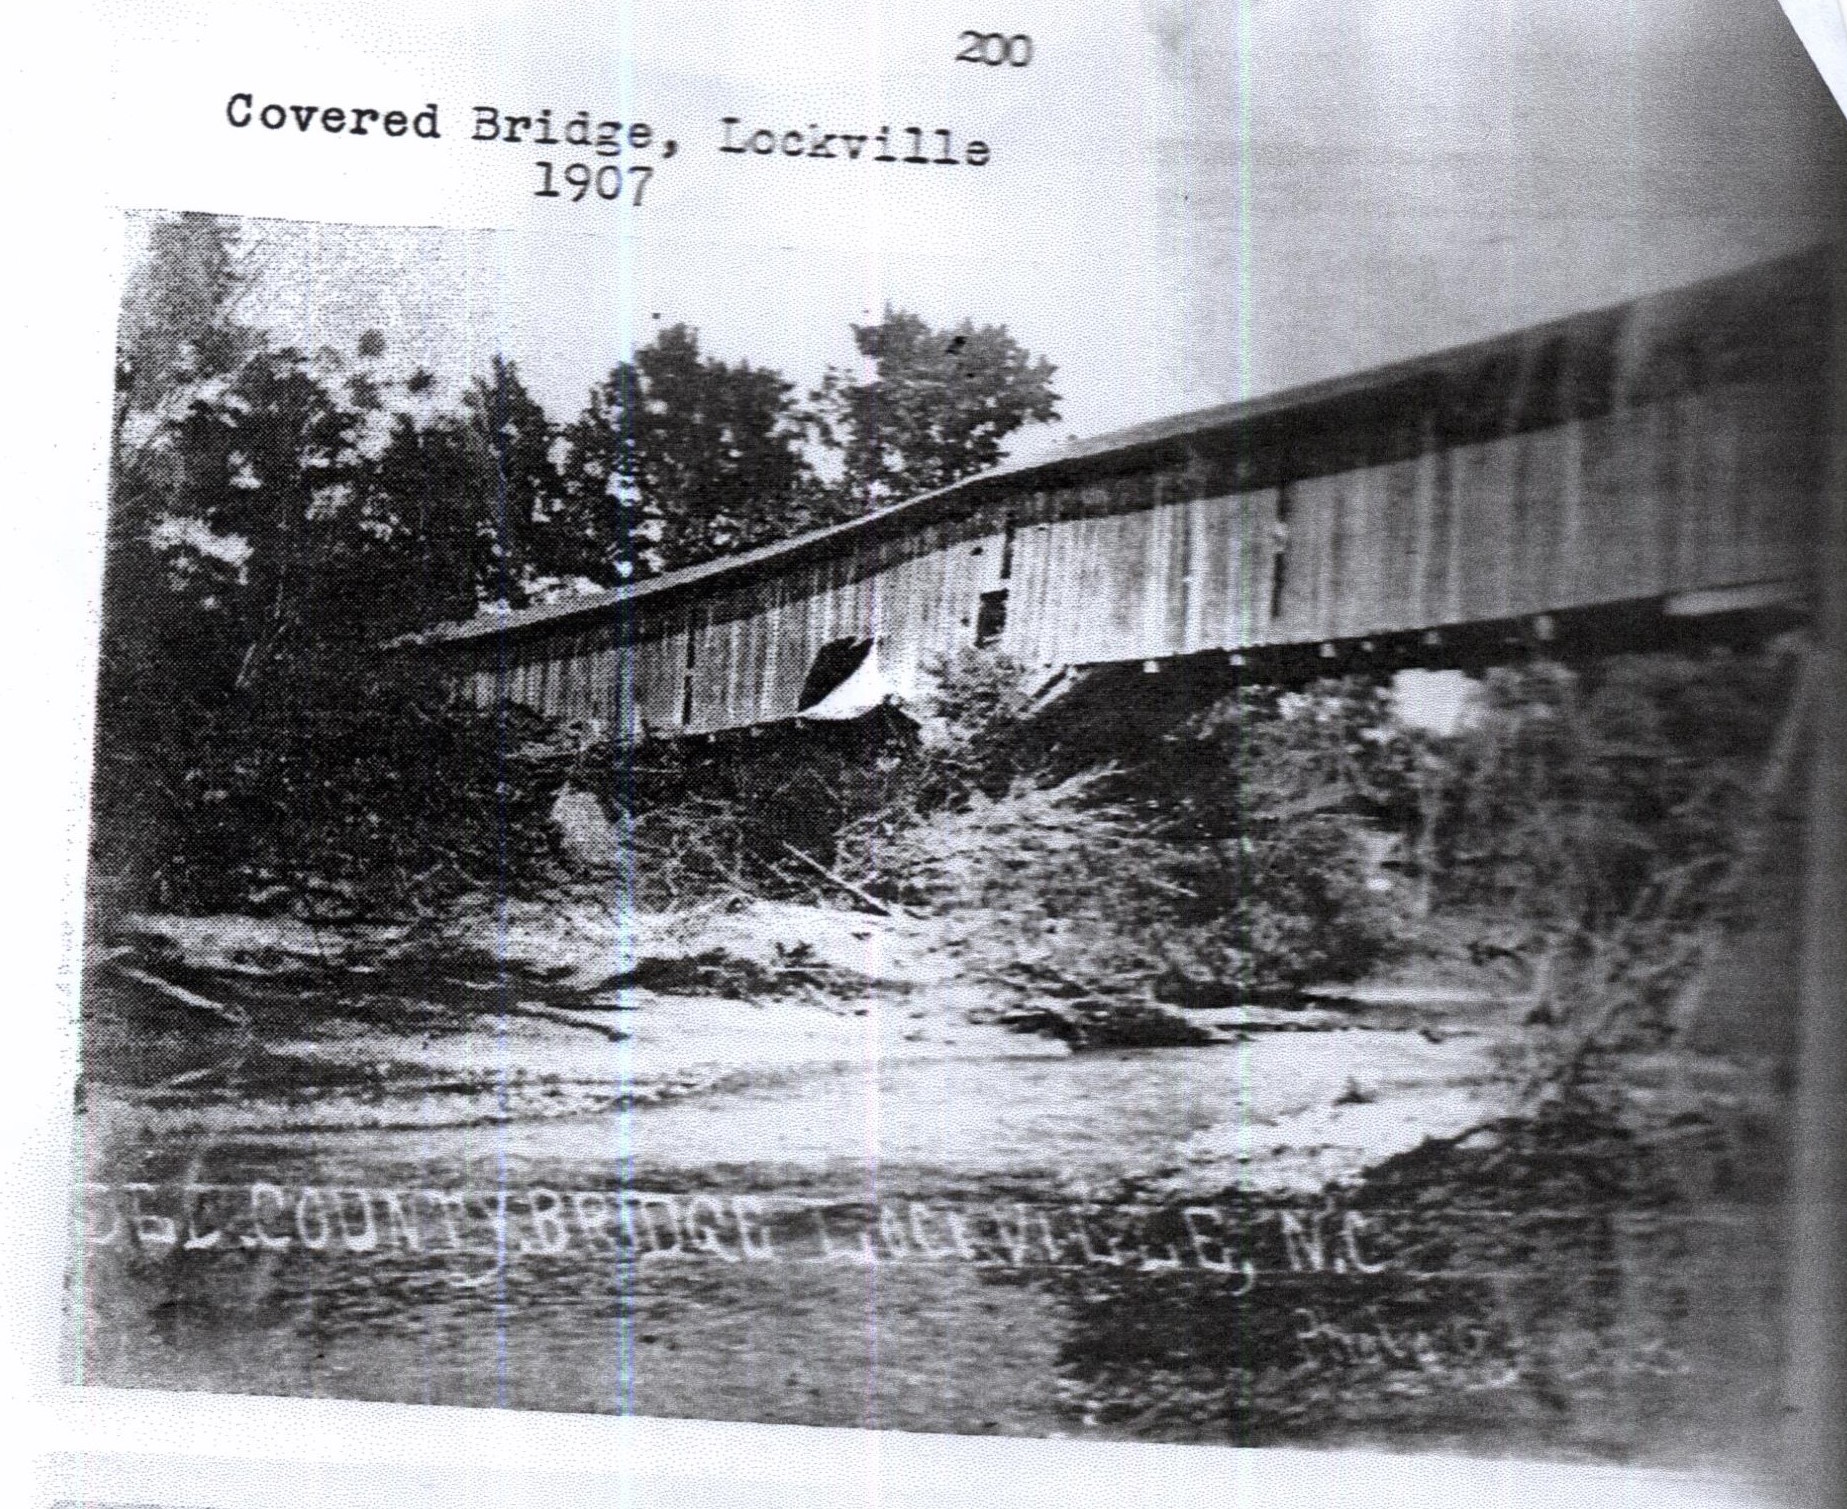 A covered bridge in Lockville, circa 1907. (photo courtesy of the Chatham Historical Society.)